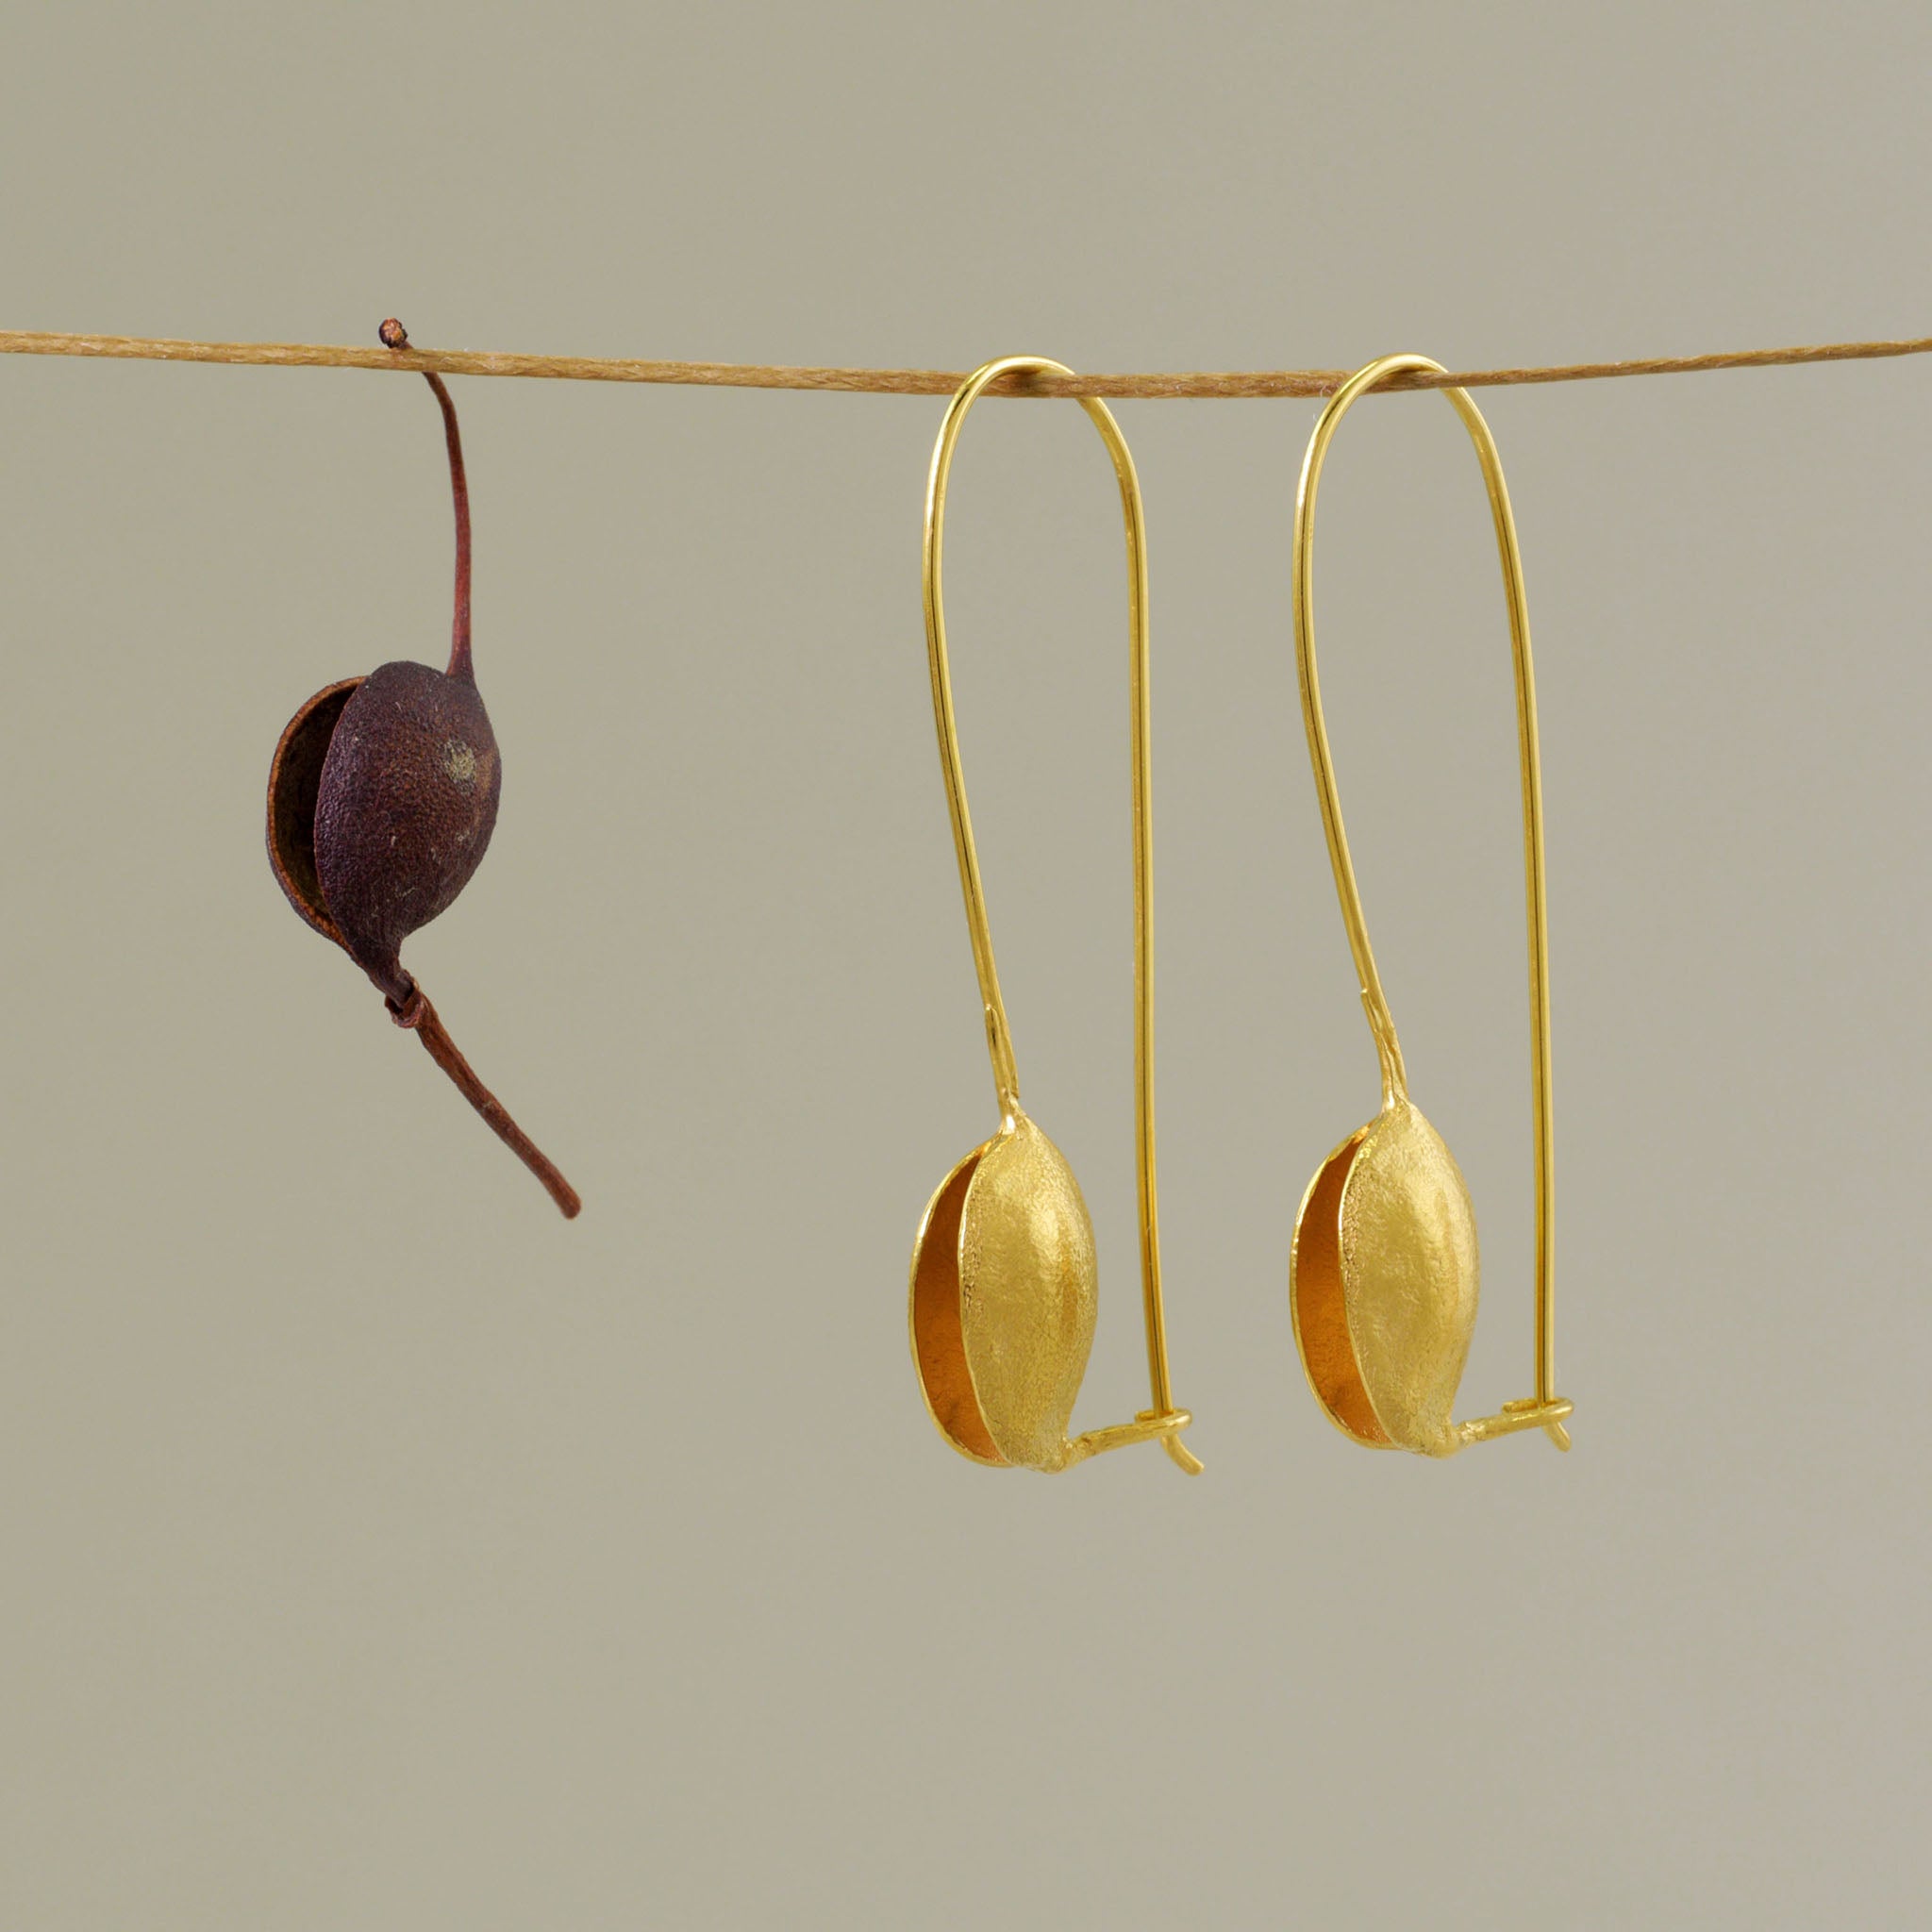 Nature-inspired Gold drop earrings, replicating captivating dried seeds hanging from a natural thread beside a real dried seed.. Minimalistic, chic, and elegant, embodying natural beauty and femininity.